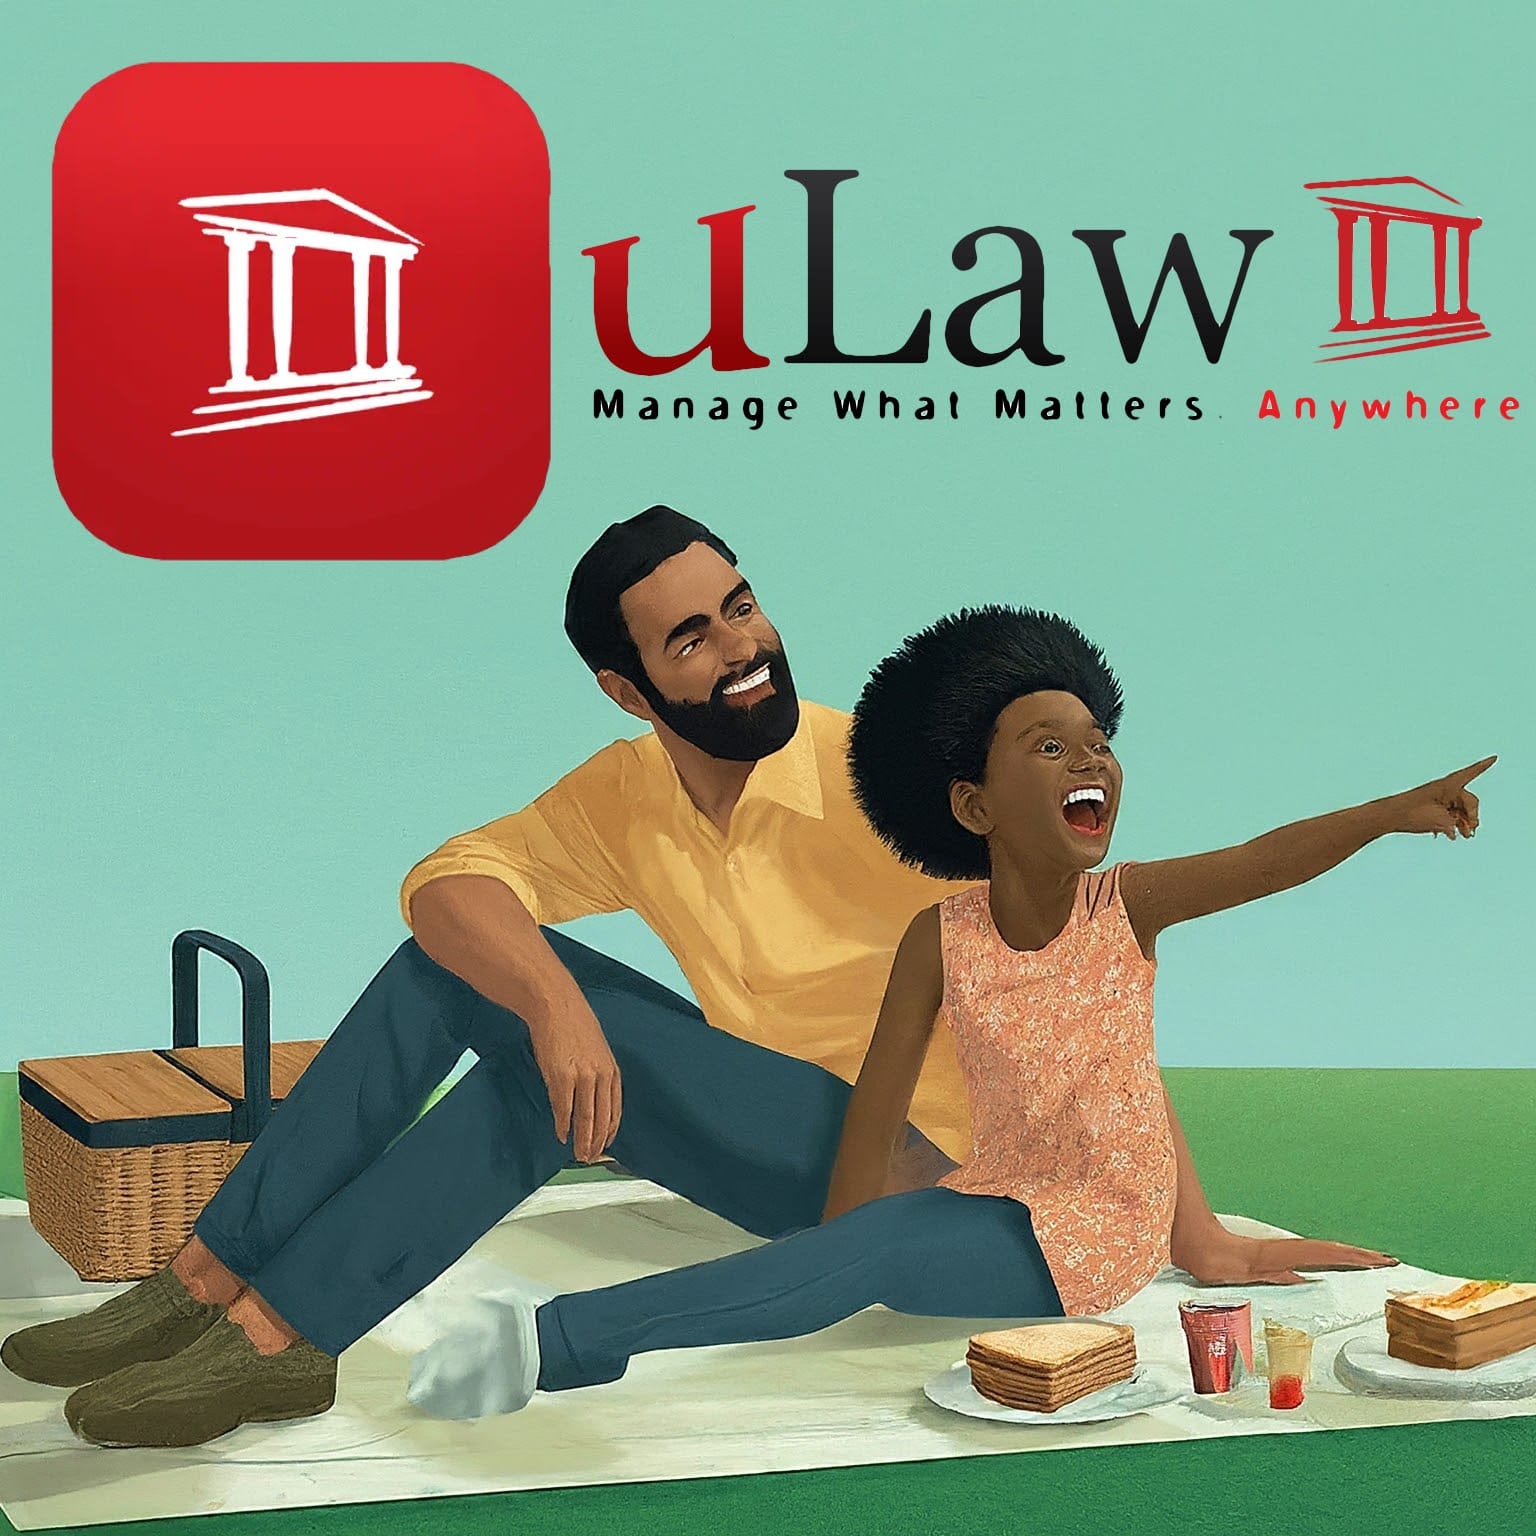 Solo Legal Eagles Soar: How uLawPractice Saves Time and Strengthens Family Bonds